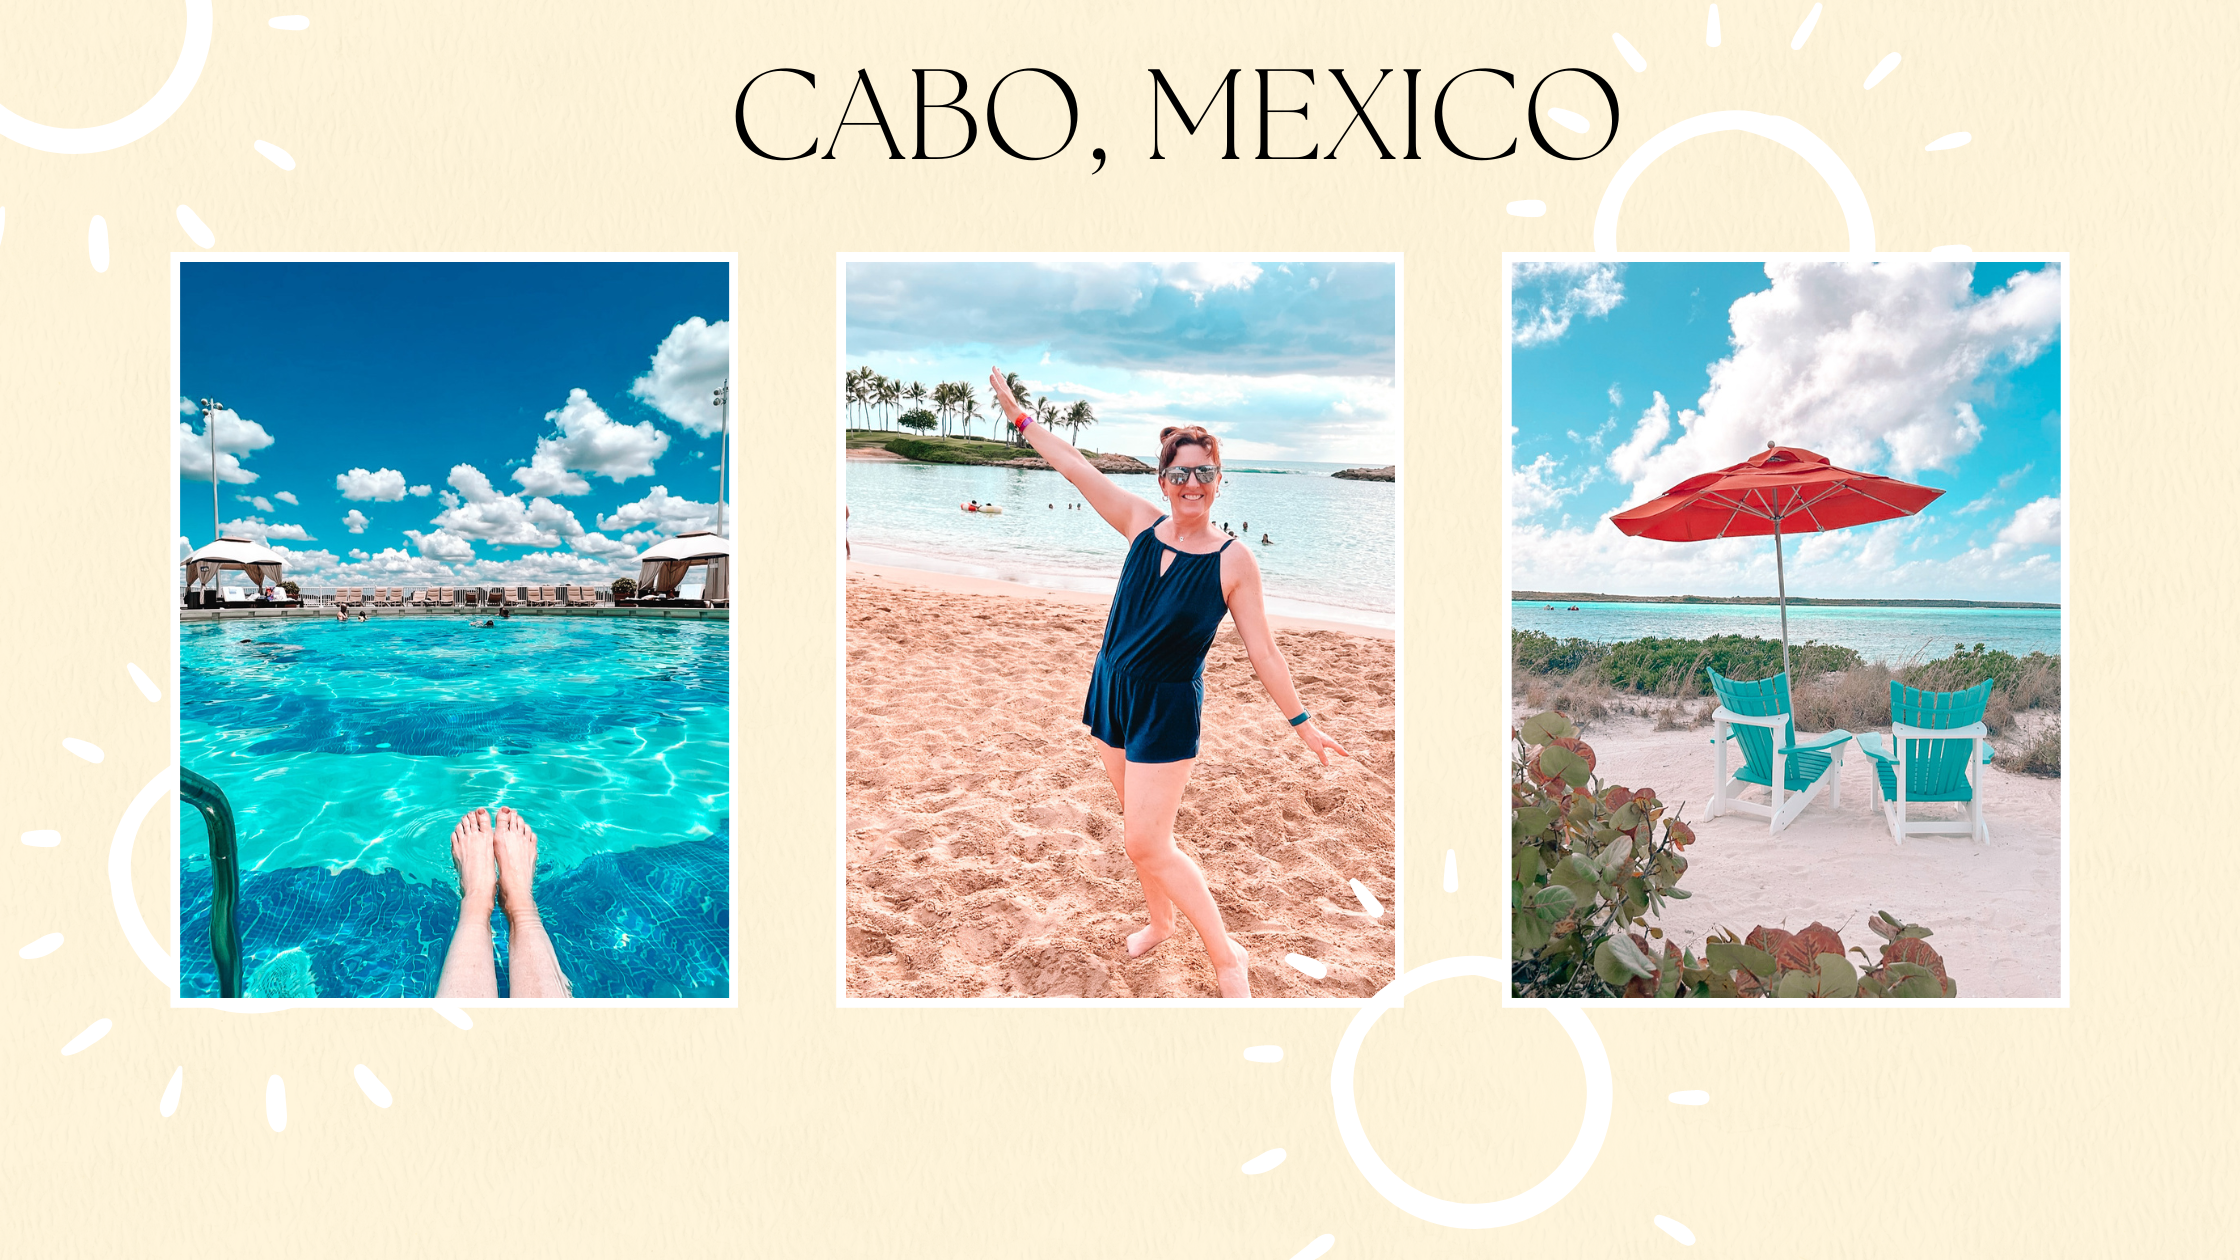 Join Us As We Enjoy Time in Cabo, Mexico!